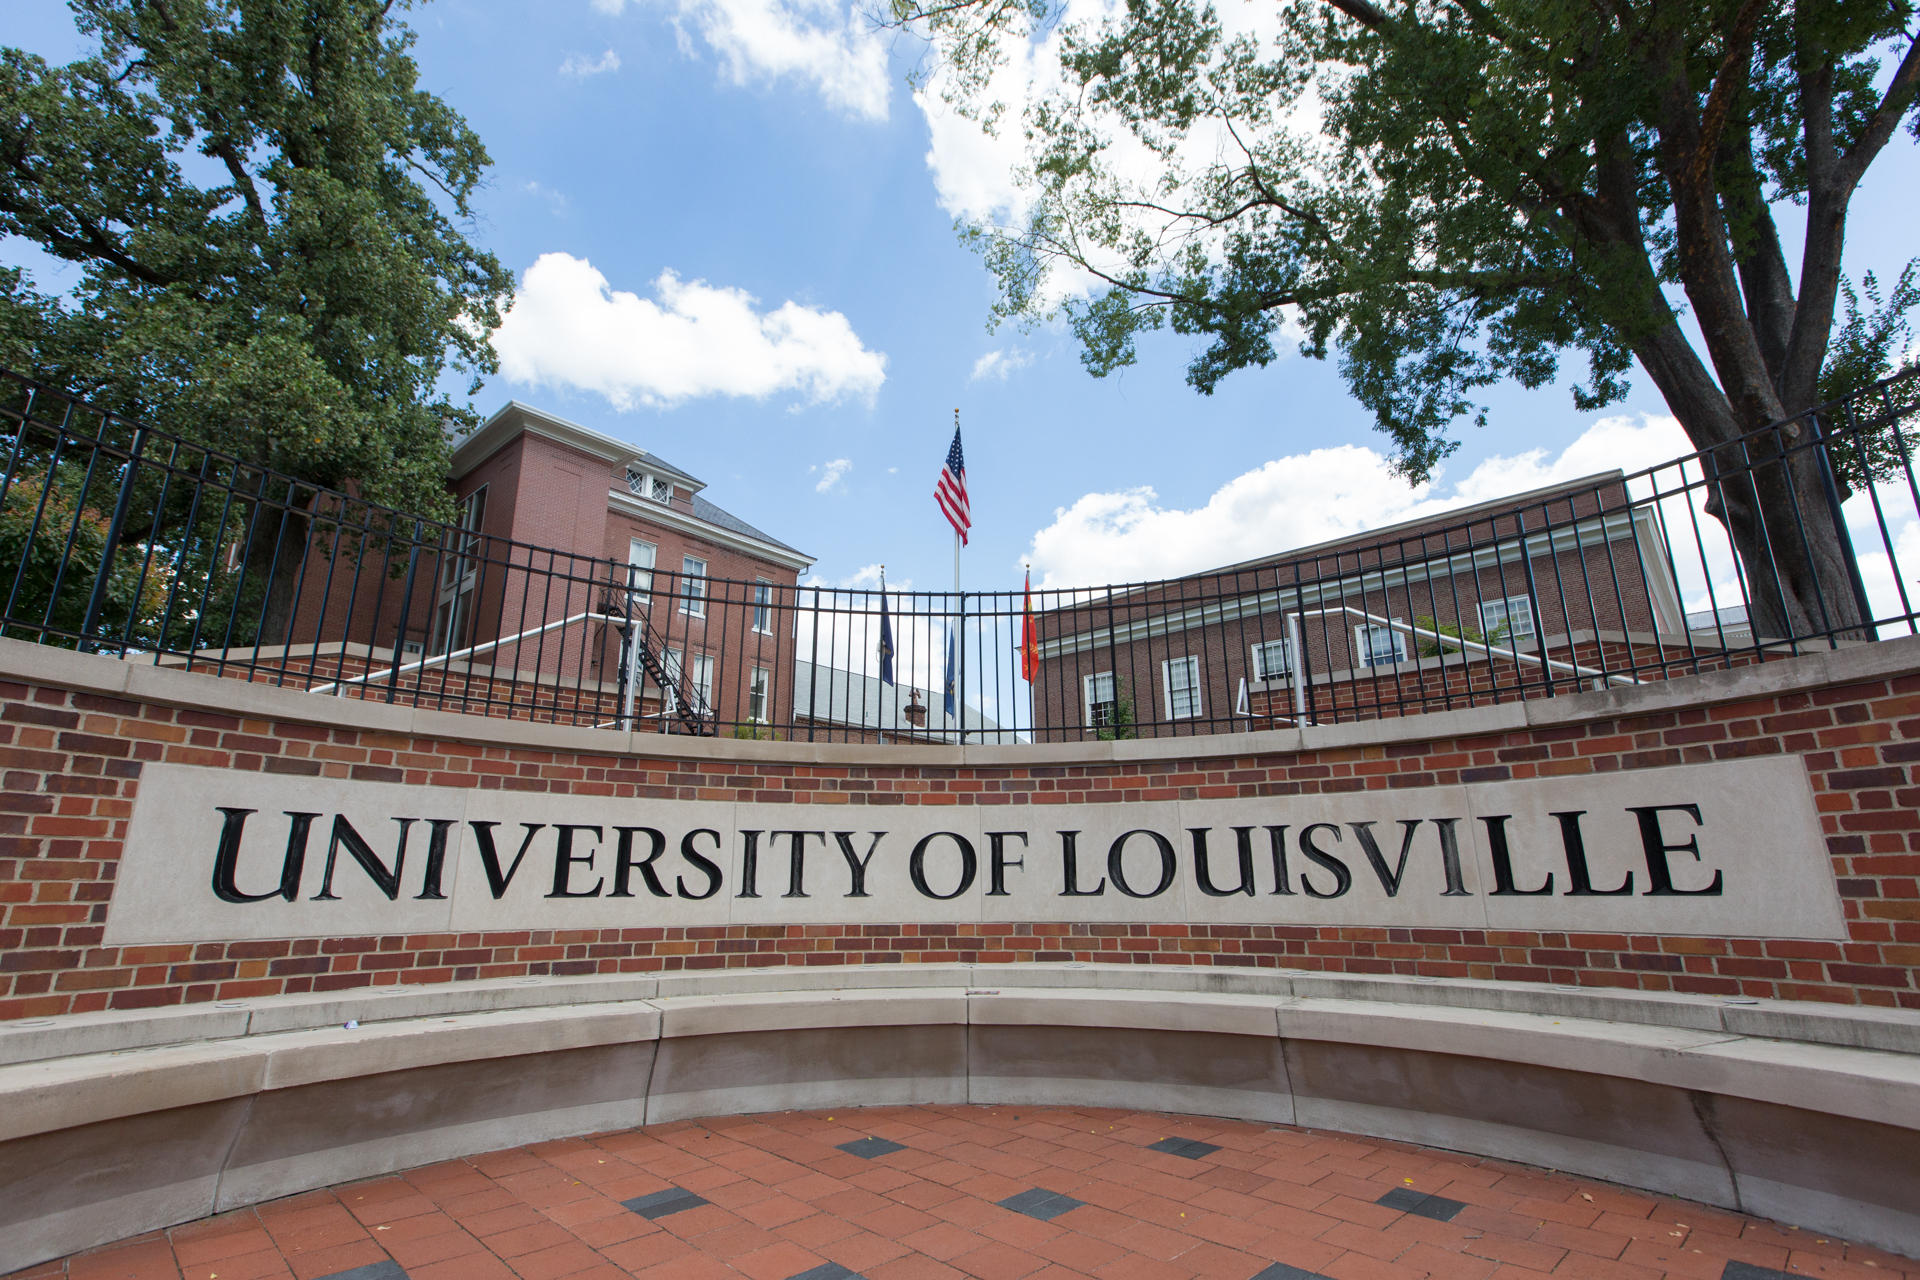 College of Education and Human Development, University of Louisville